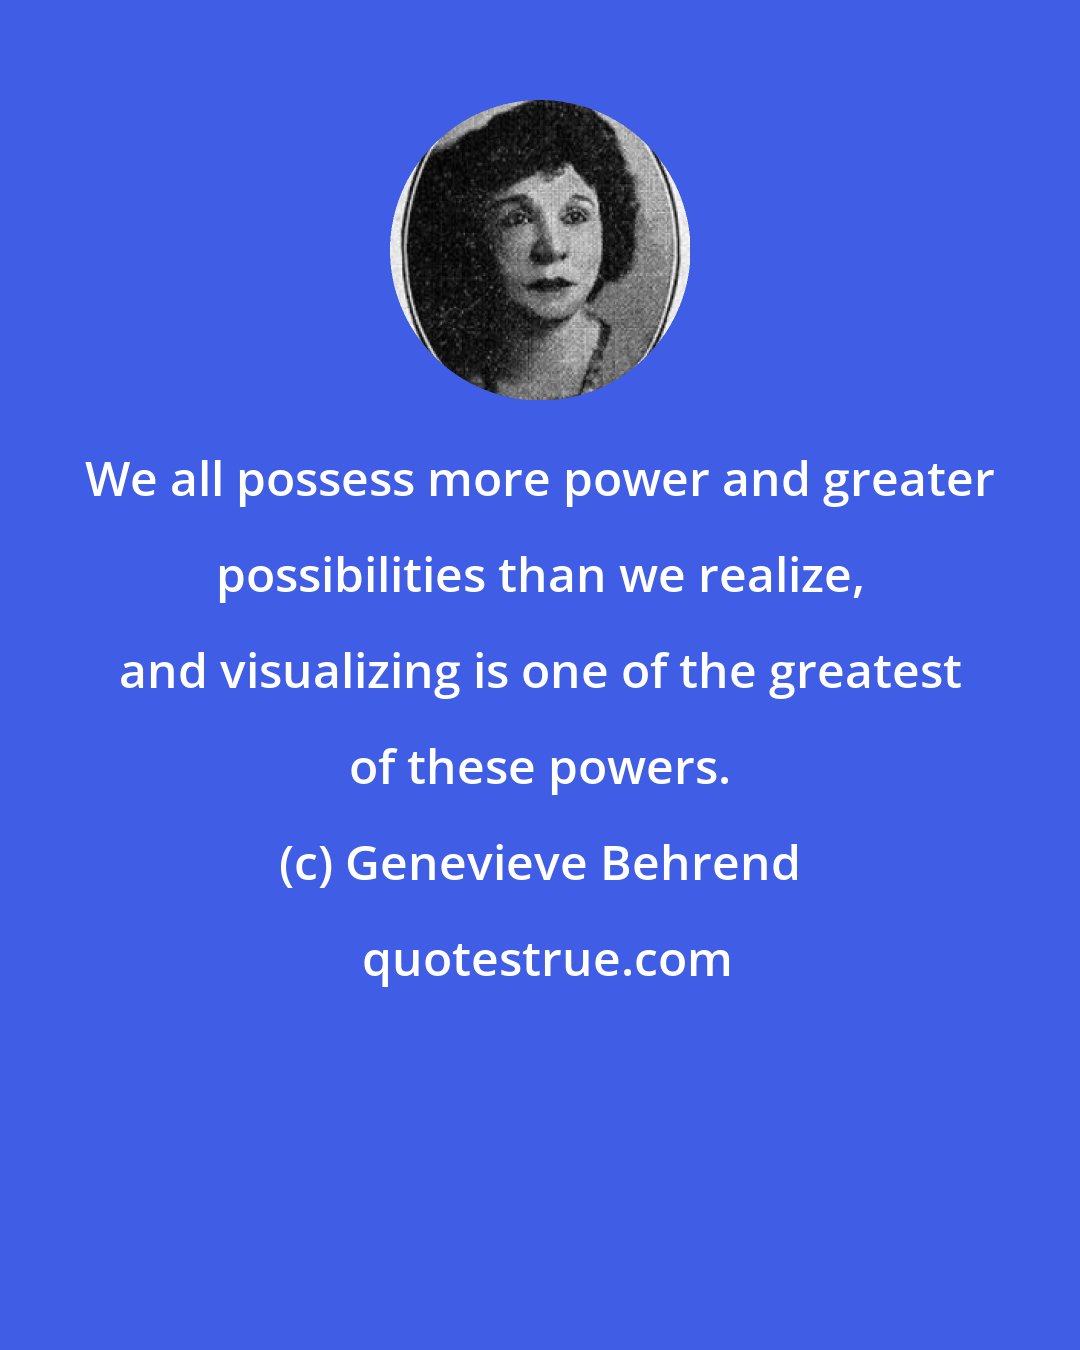 Genevieve Behrend: We all possess more power and greater possibilities than we realize, and visualizing is one of the greatest of these powers.